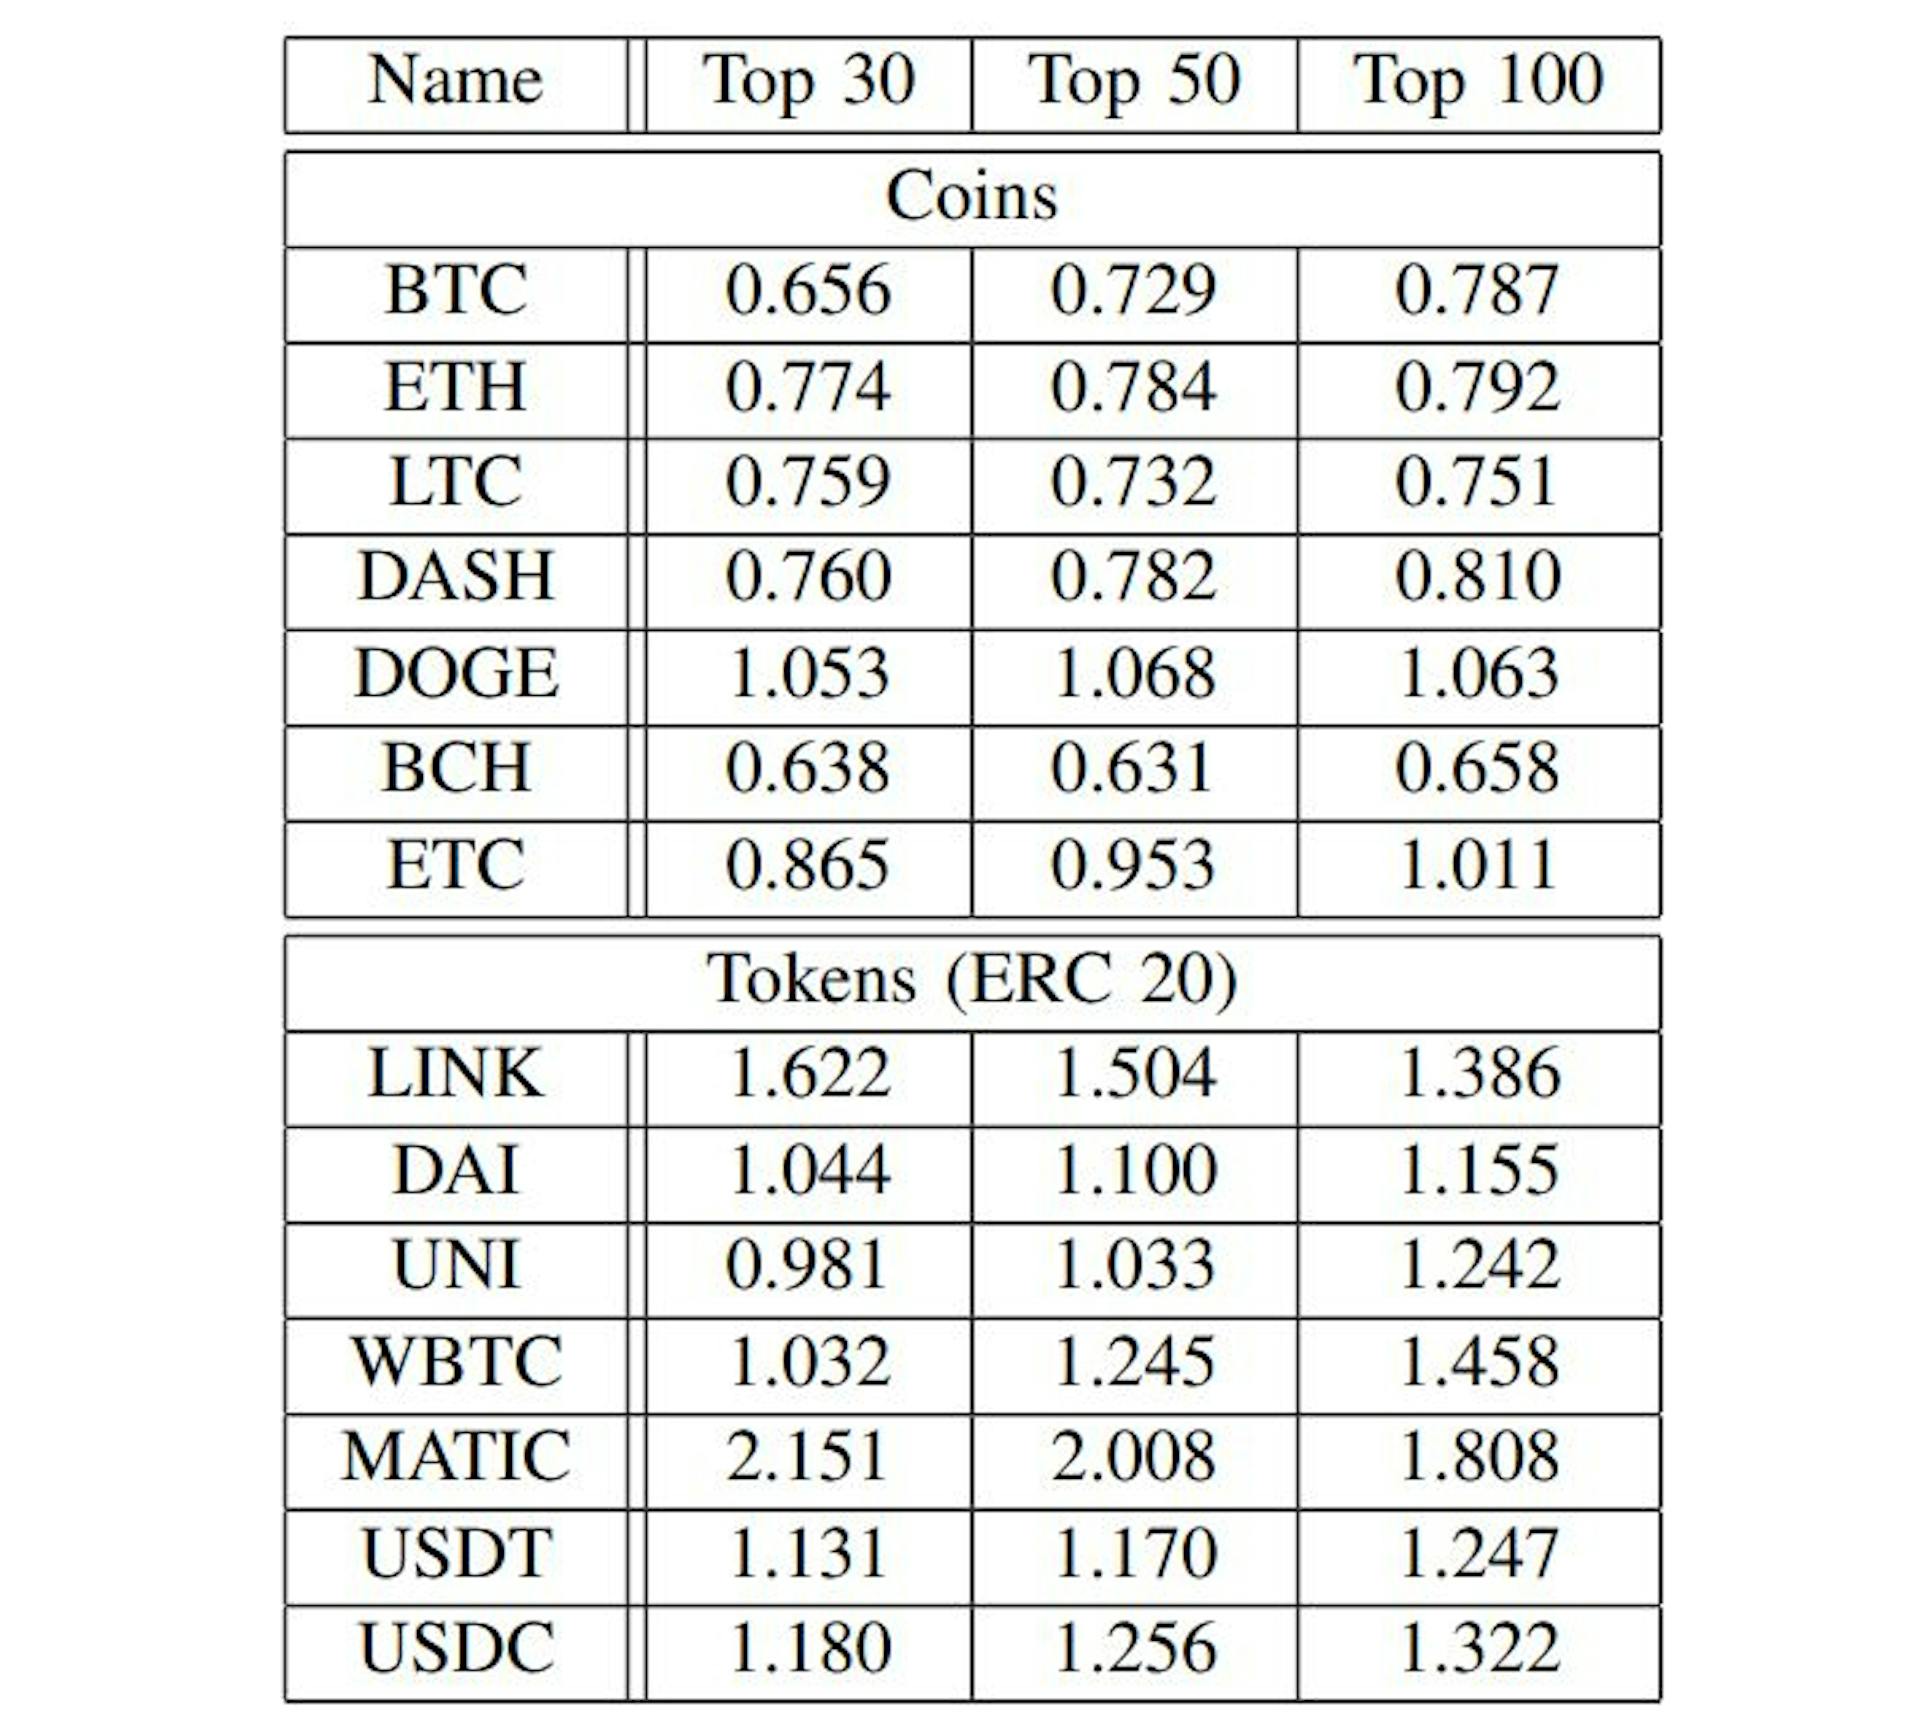 TABLE I: Average Zipf’s law coefficient of the token distribution for the top 30, 50, and 100 token holders in selected cryptocurrencies.